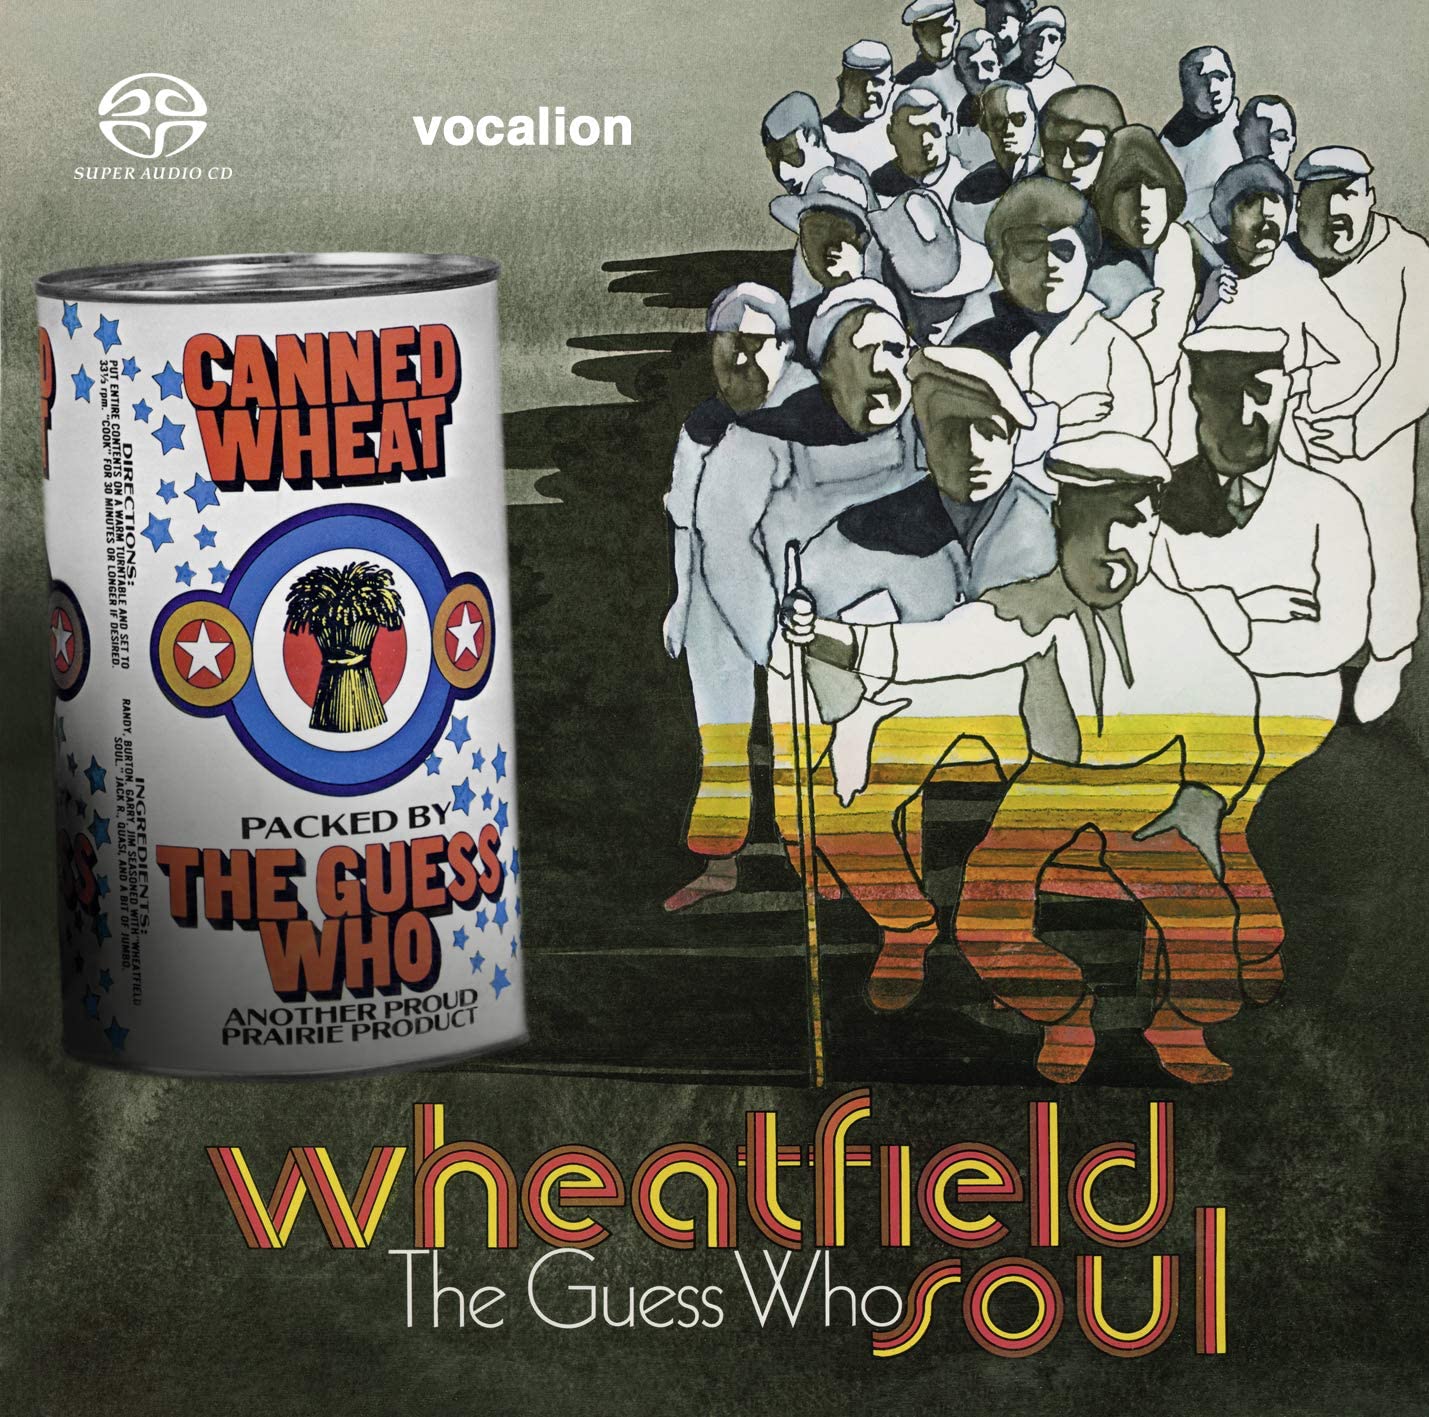 The Guess Who – Wheatfield Soul & Canned Wheat (1969) [Reissue 2019] MCH SACD ISO + FLAC 24bit/96kHz